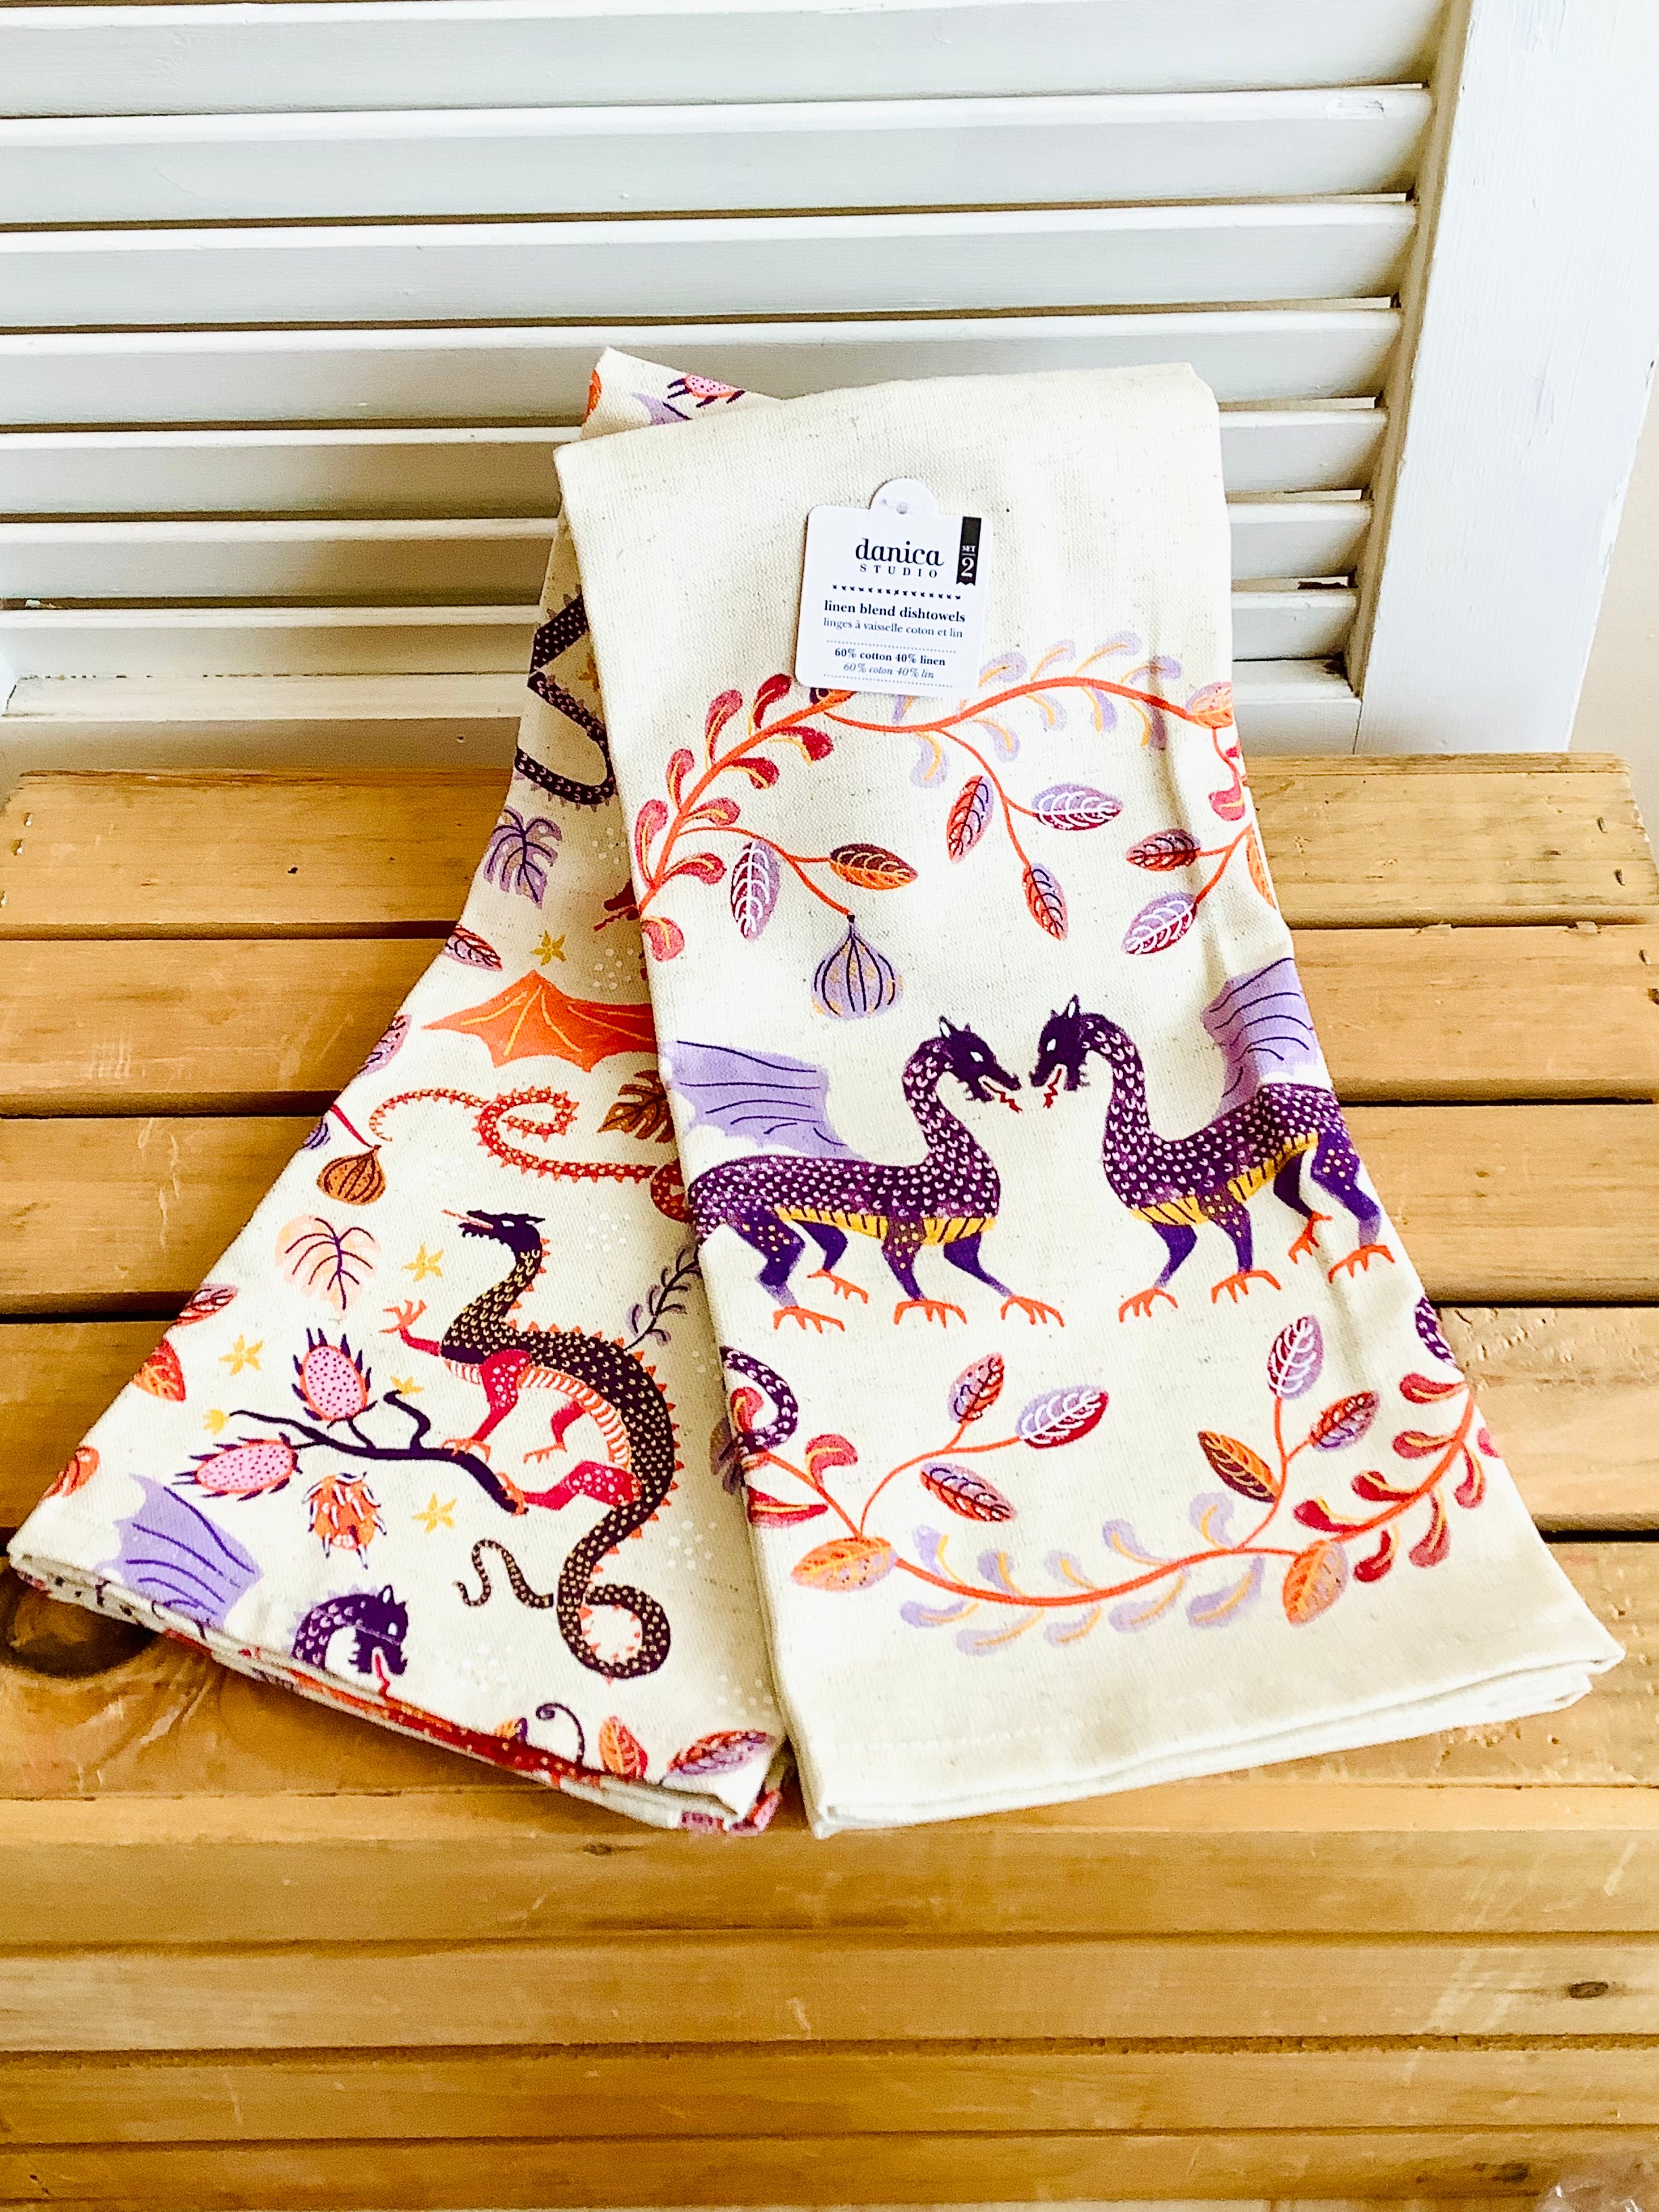 Ember - Dish towels from Danica